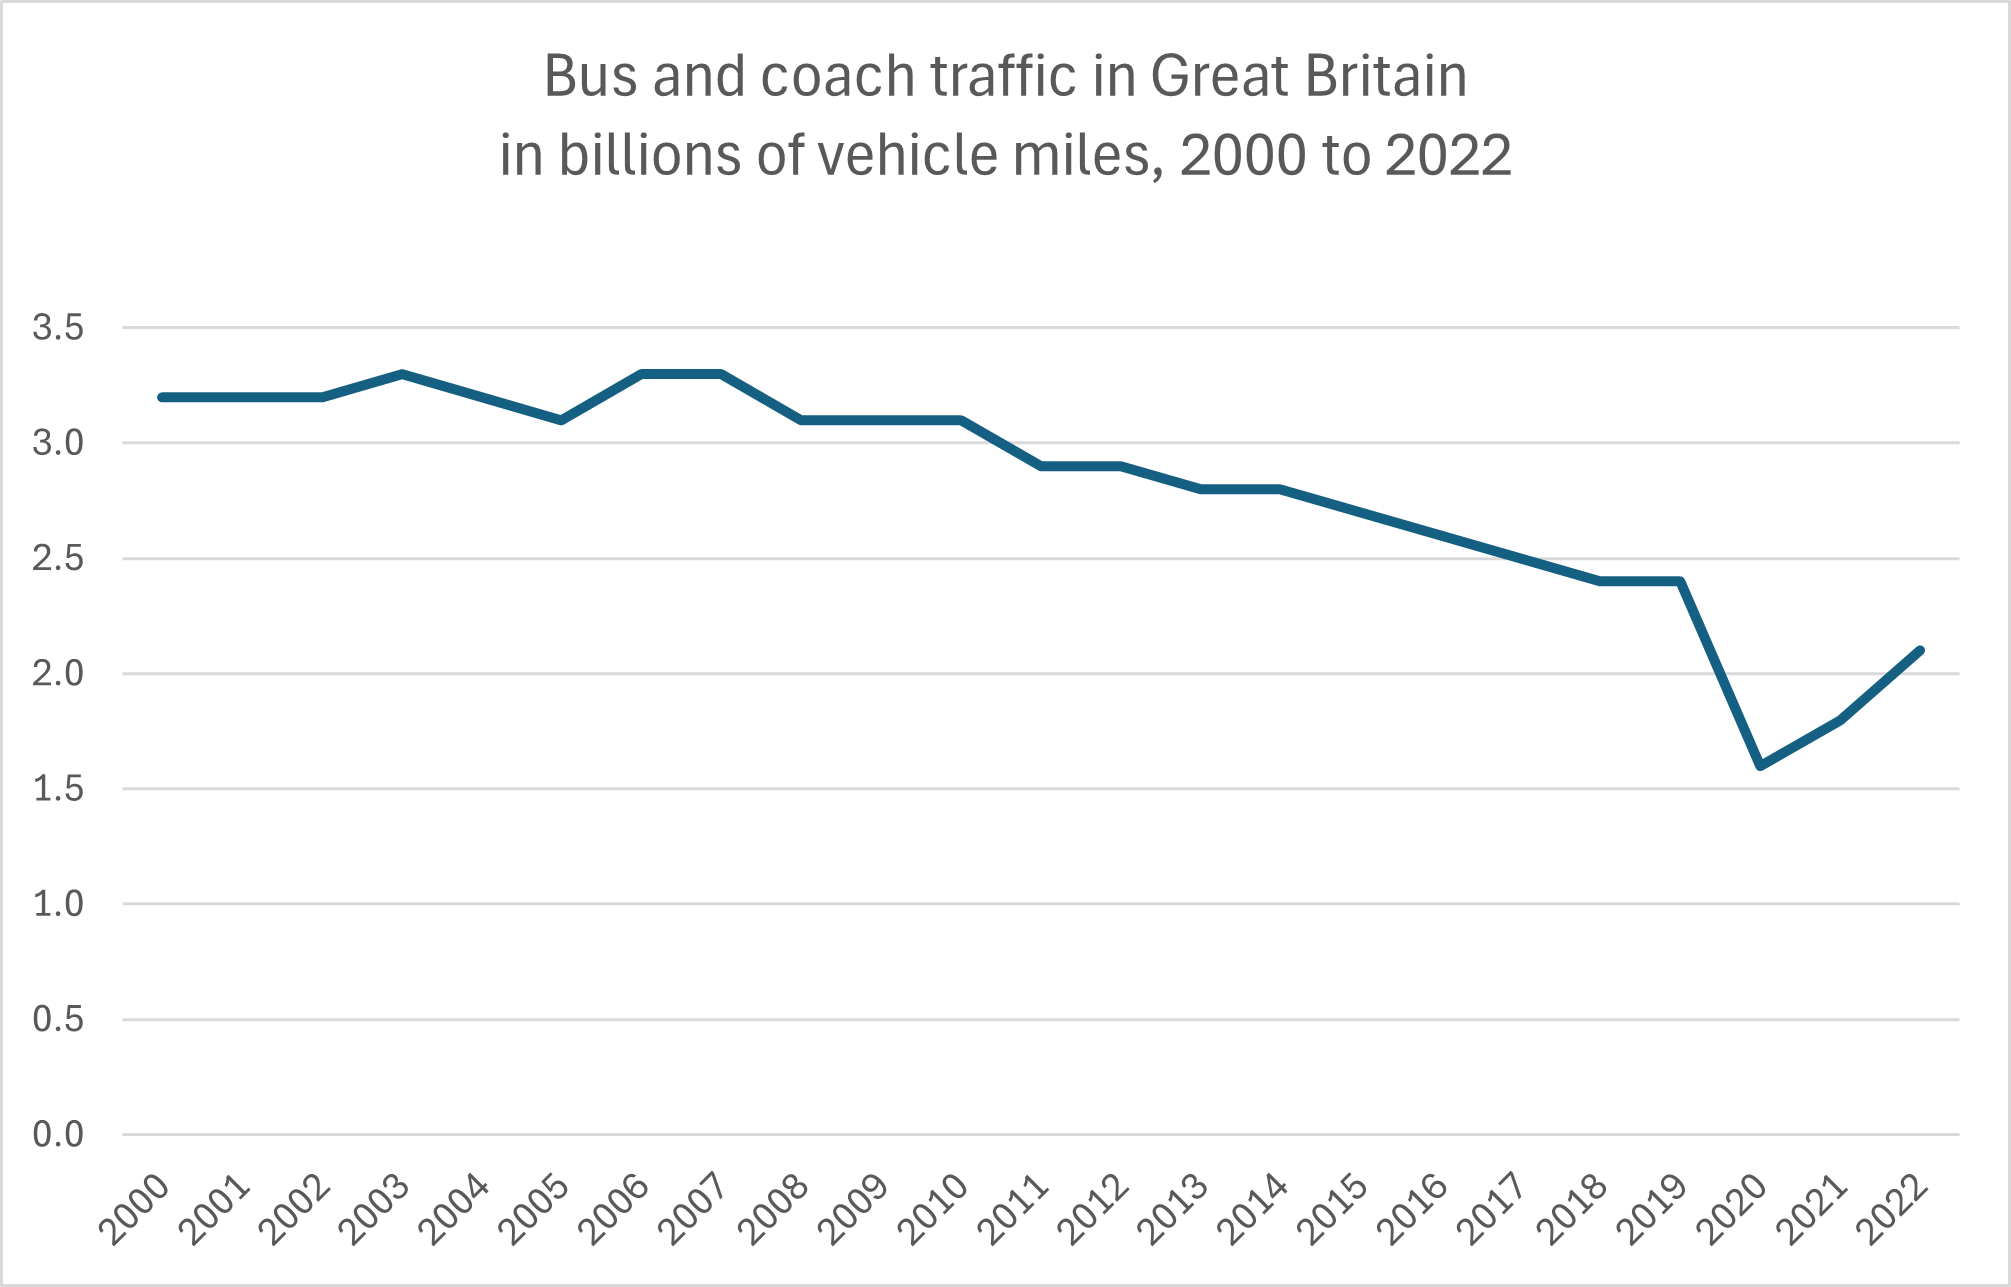 Bus and coach traffic 2000 - 2022